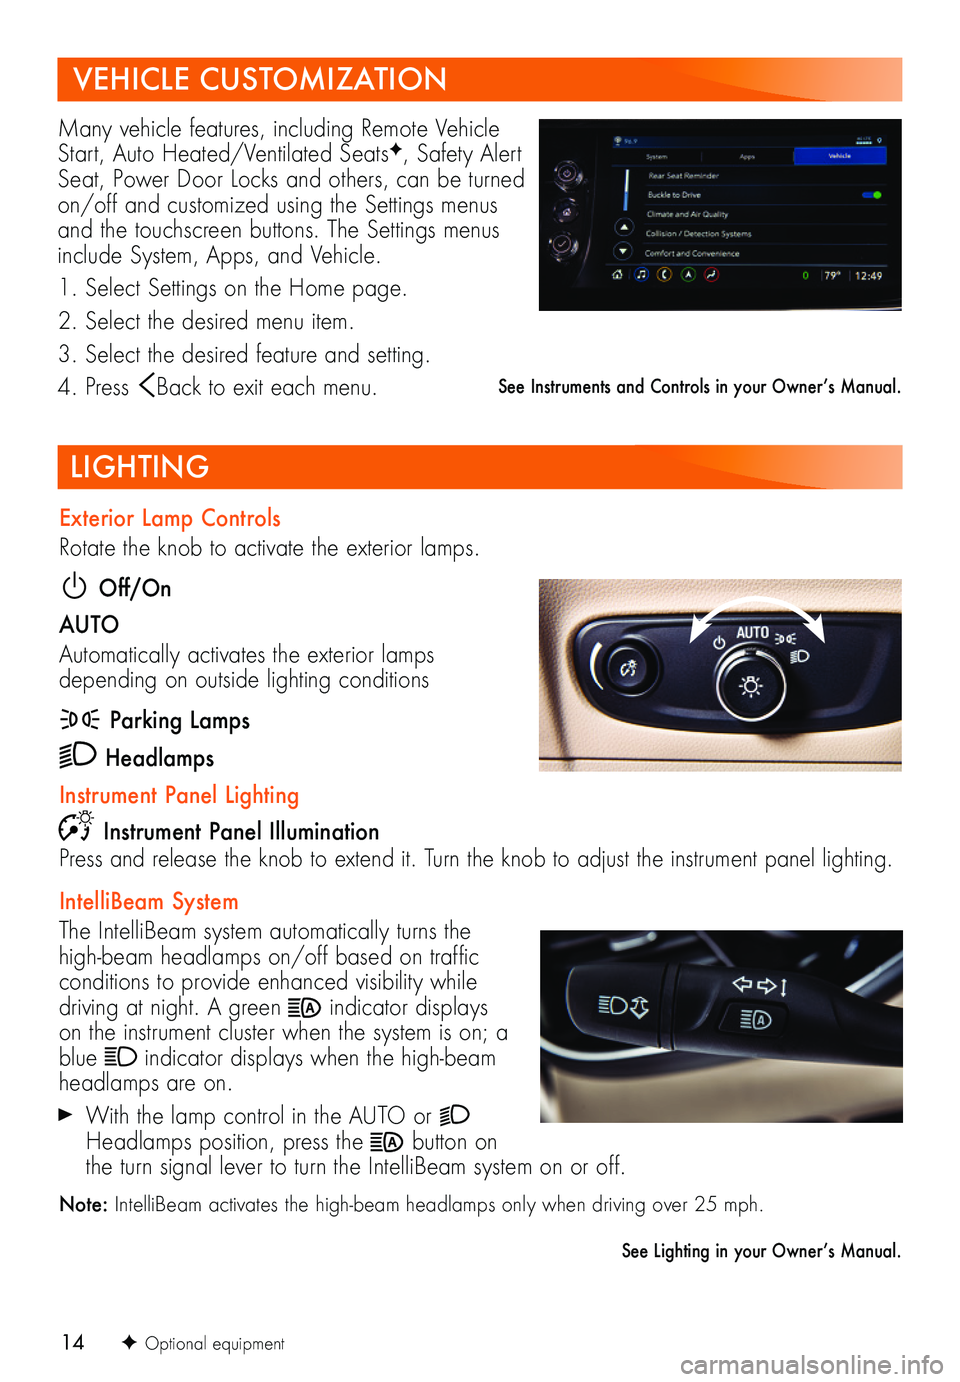 BUICK ENVISION 2021  Get To Know Guide 14
LIGHTING
F Optional equipment
Exterior Lamp Controls
Rotate the knob to activate the exterior lamps.
 Off/On
AUTO 
Automatically activates the exterior lamps depending on outside lighting condition